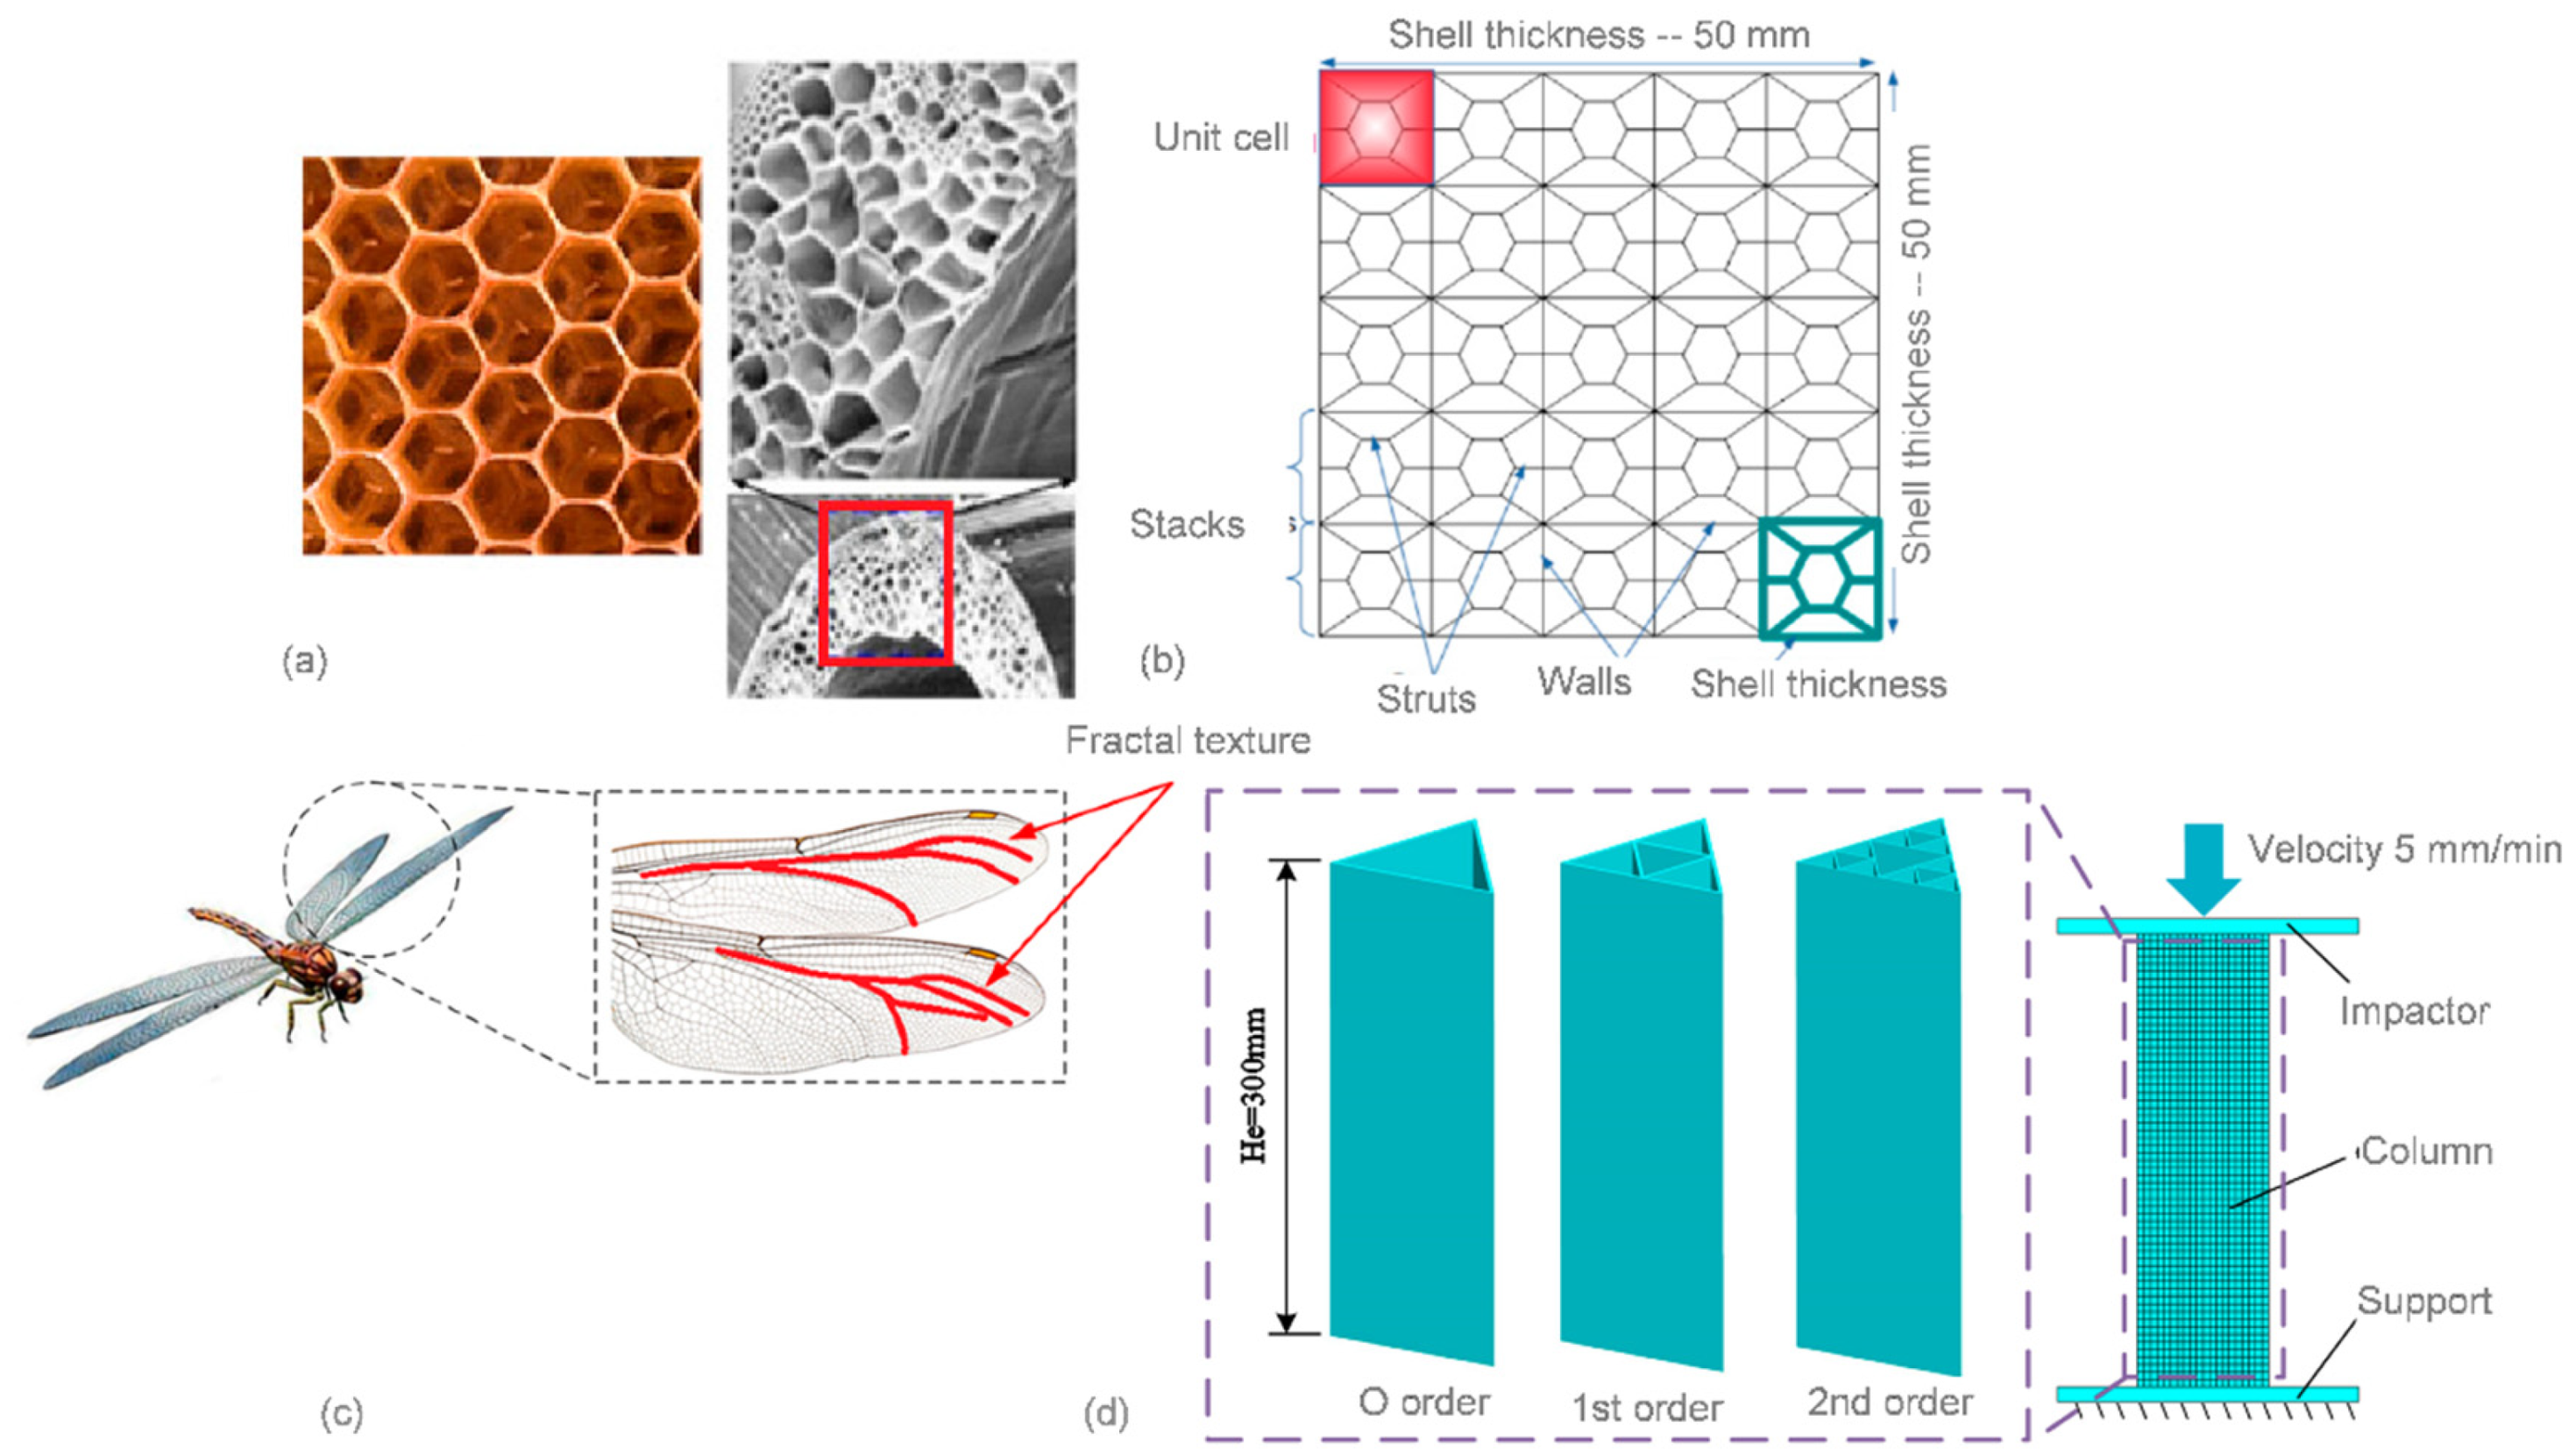 Figure 18. Bionic-inspired cellular structure design: (a) bee honeycomb pattern; (b) geometry of the cellular structure designed for numerical modelling [112]; (c) fractal texture of the wings of dragonflies; and (d) finite element model of the novel fractal structures [114]